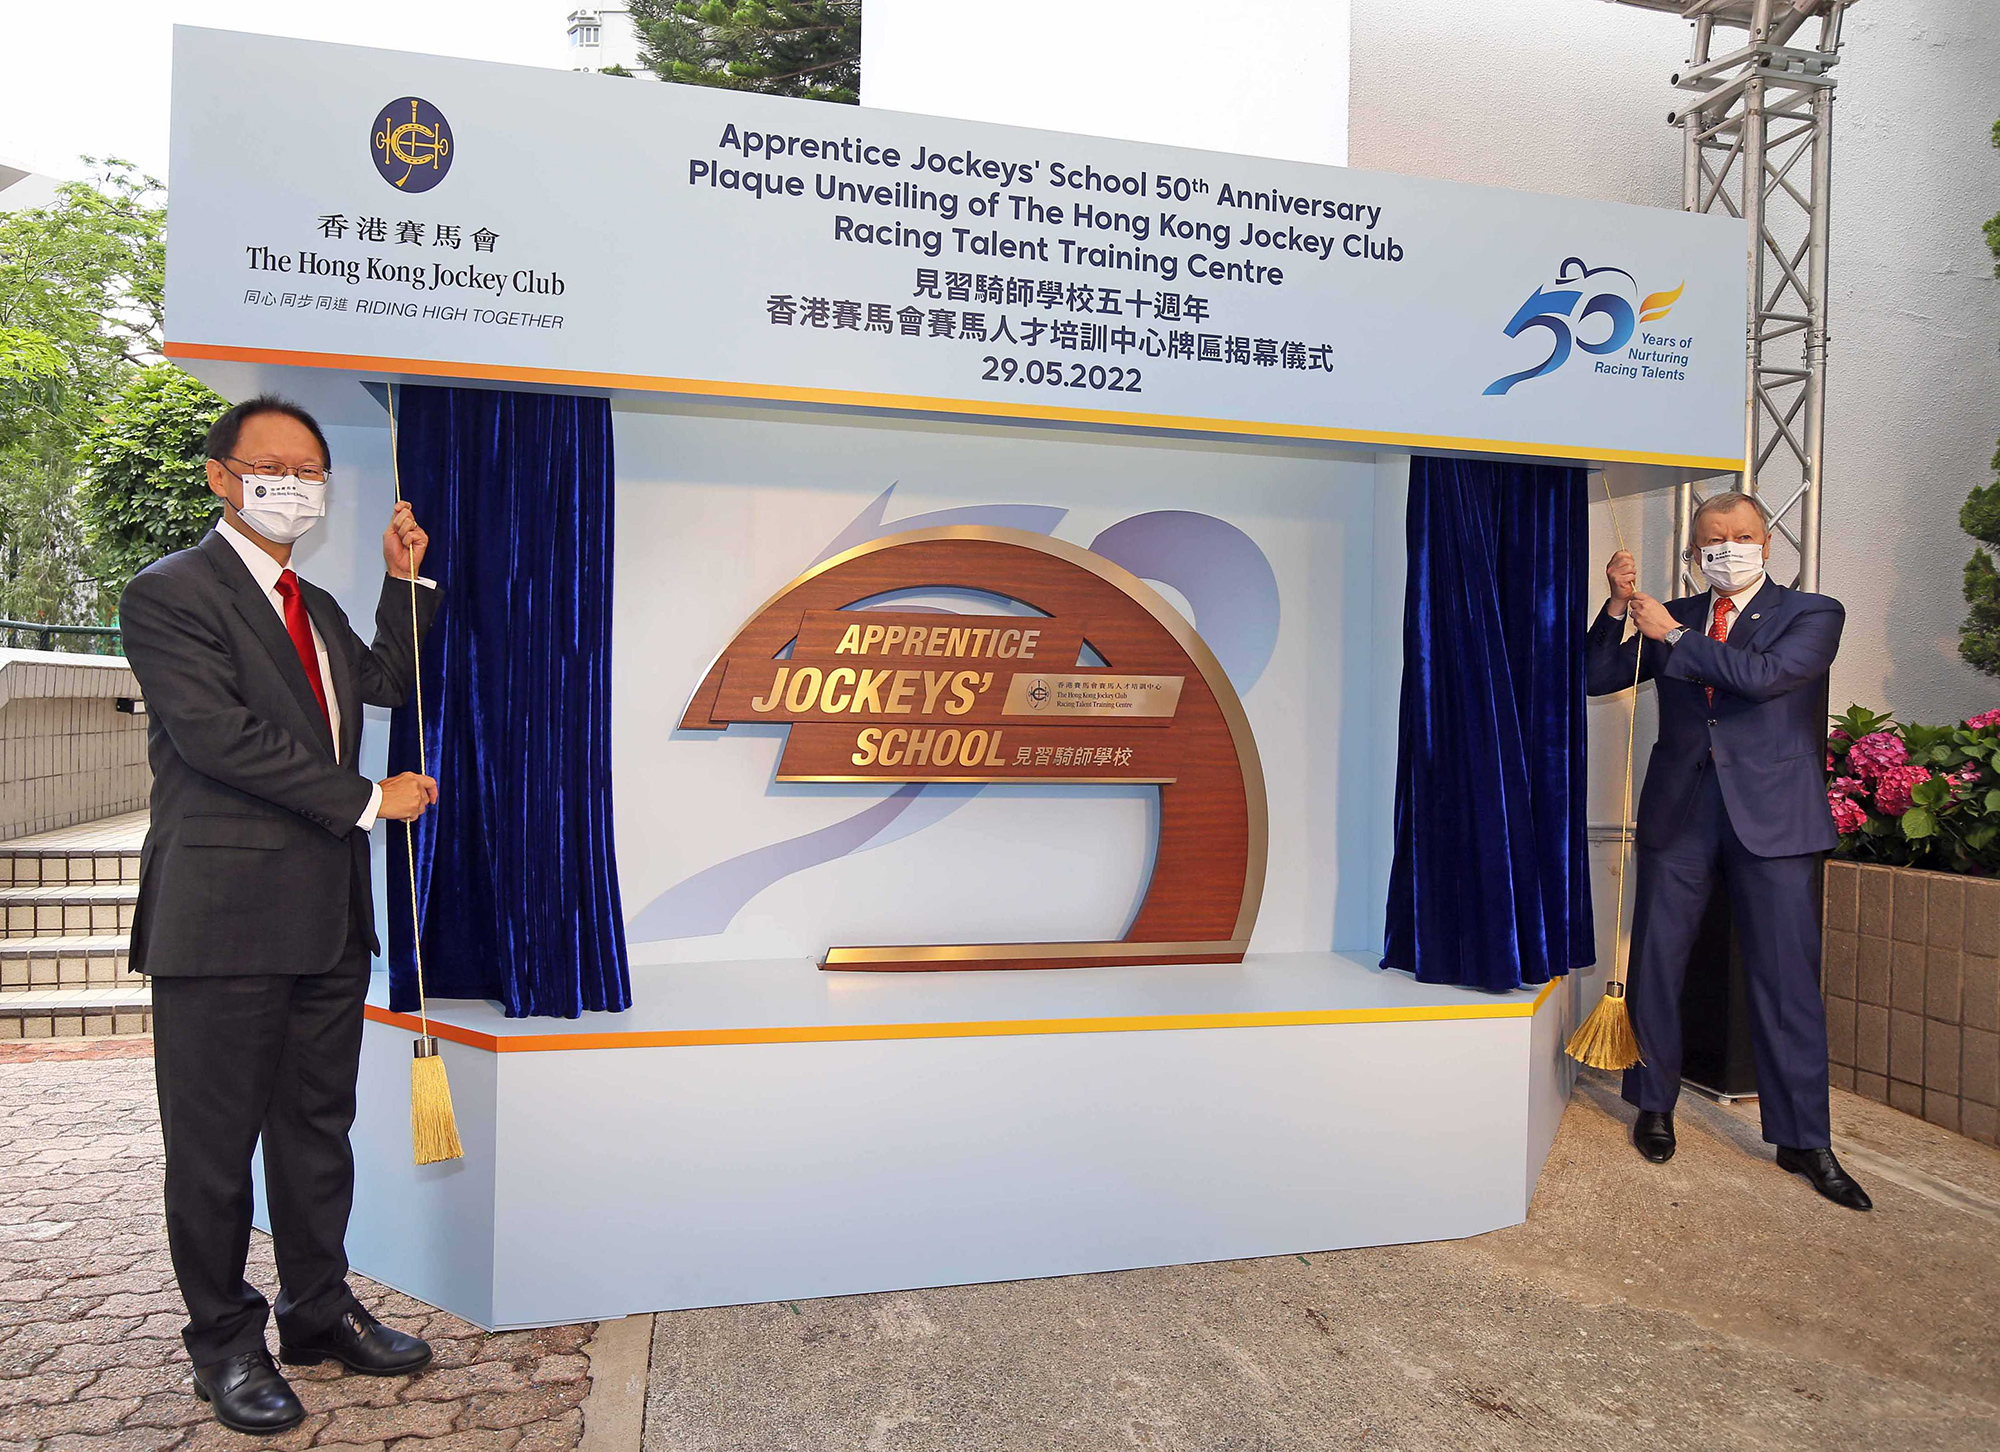 Chairman of The Hong Kong Jockey Club Philip Chen (left) and Chief Executive Officer of The Hong Kong Jockey Club Winfried Engelbrecht-Bresges (right) officiate at the plaque unveiling ceremony of the Racing Talent Training Centre Apprentice Jockeys’ School.